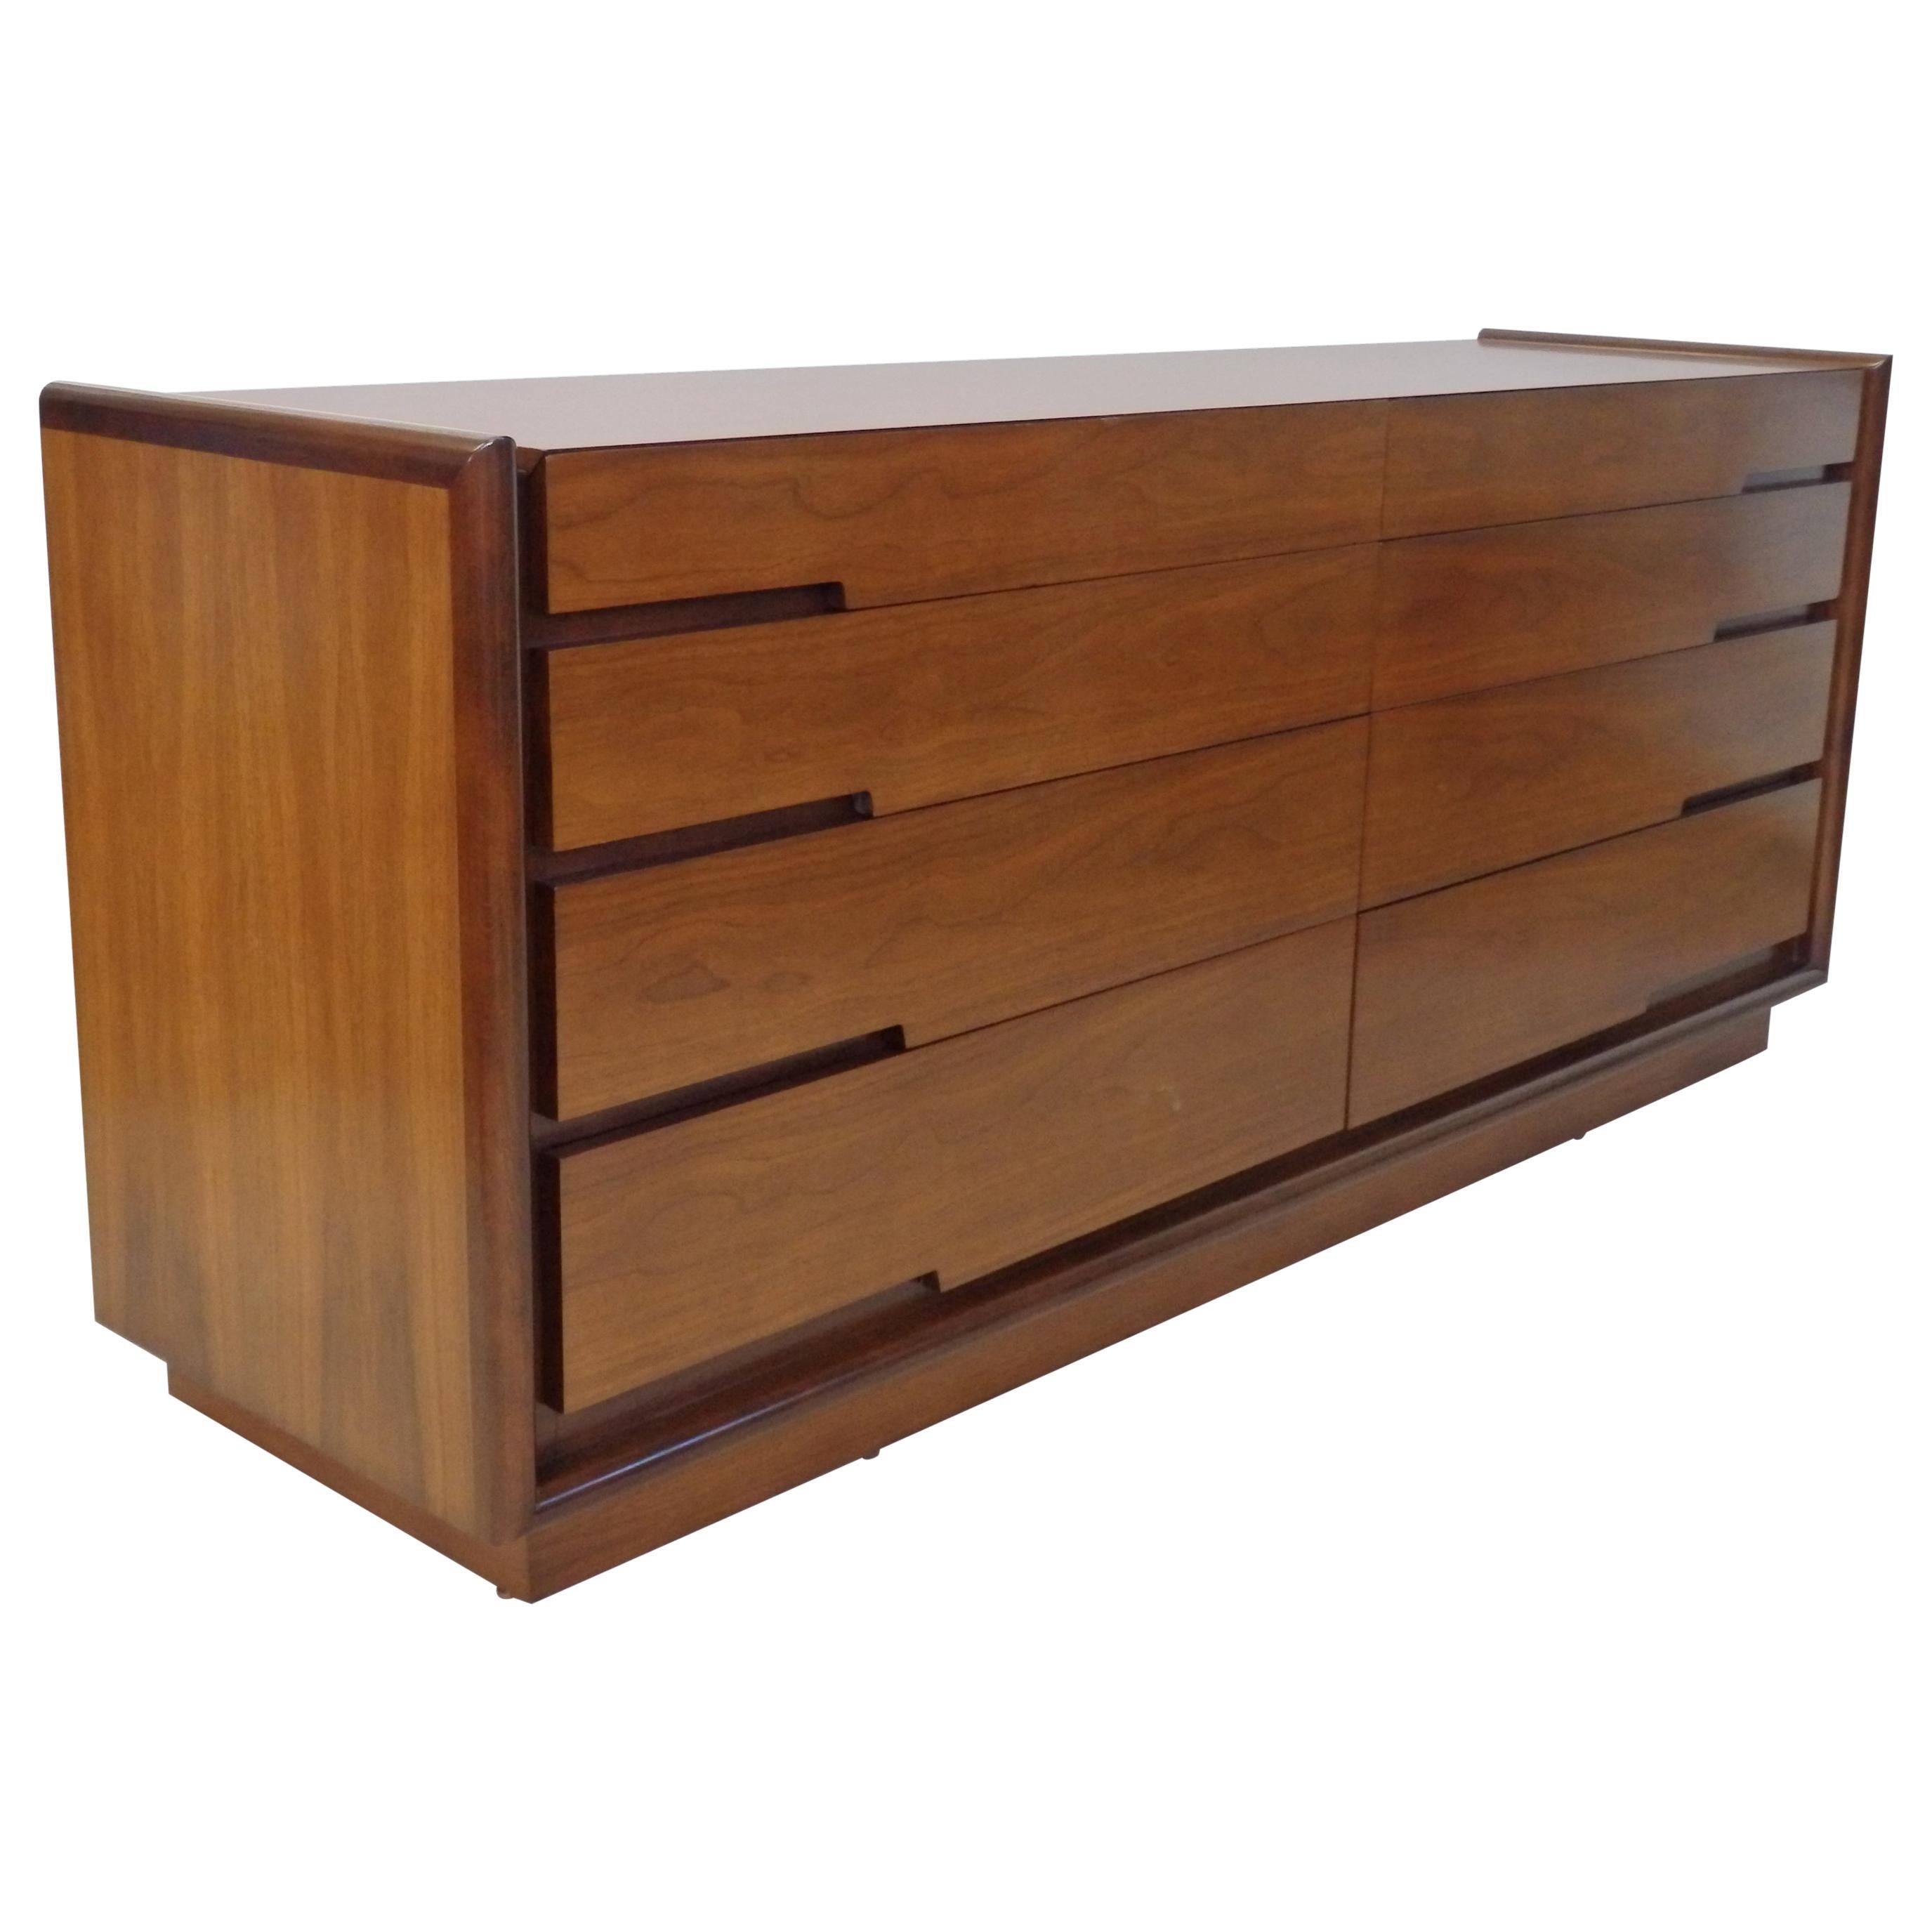 Edmund Spence Long Low Swedish Double Dresser with graduated drawers